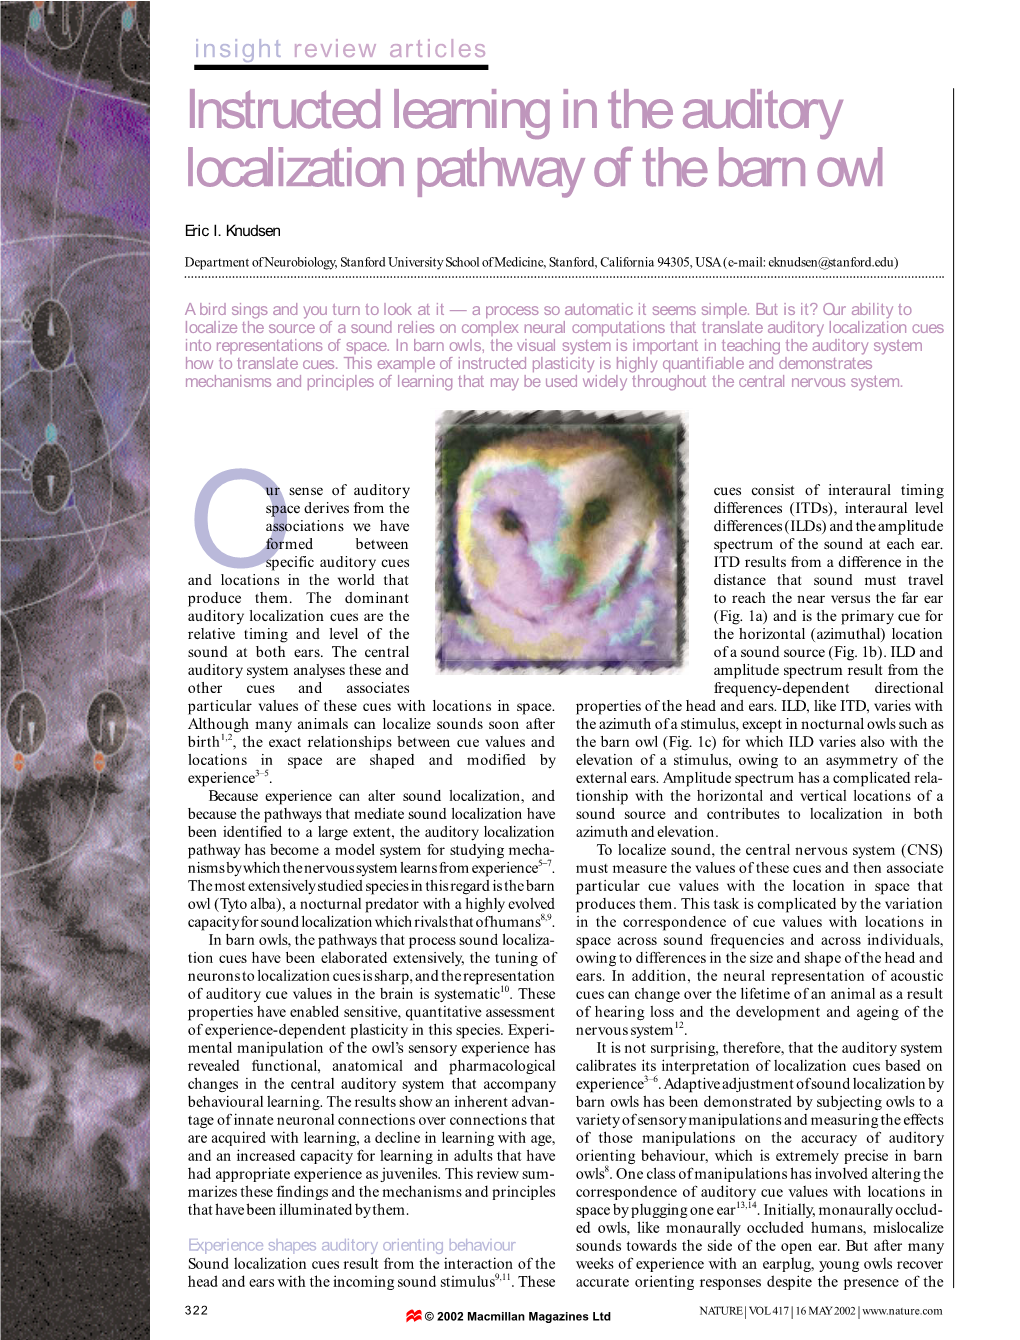 Instructed Learning in the Auditory Localization Pathway of the Barn Owl